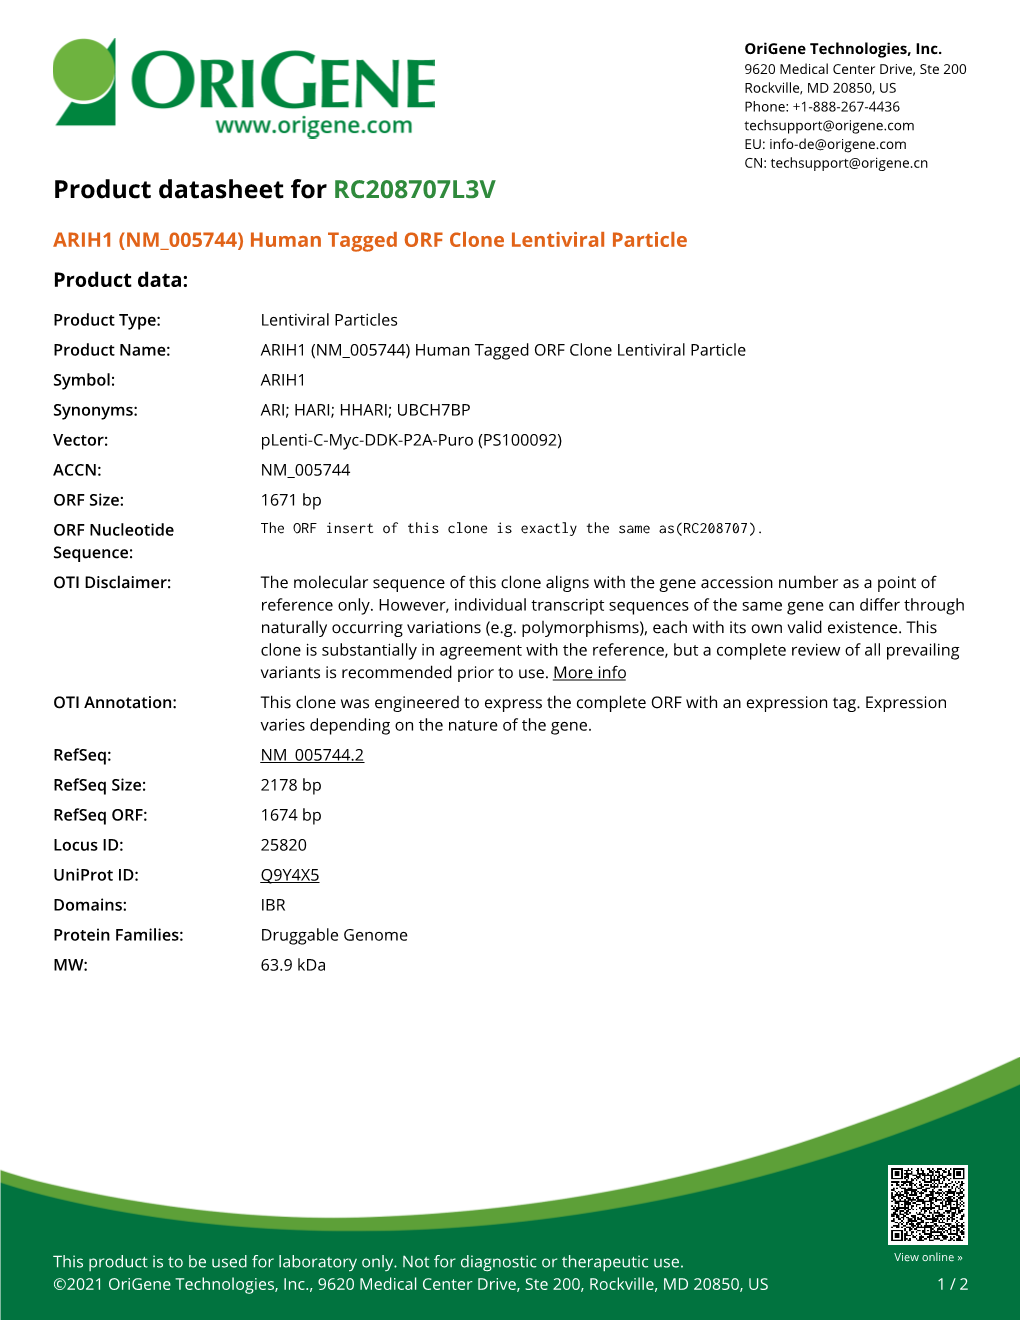 ARIH1 (NM 005744) Human Tagged ORF Clone Lentiviral Particle Product Data